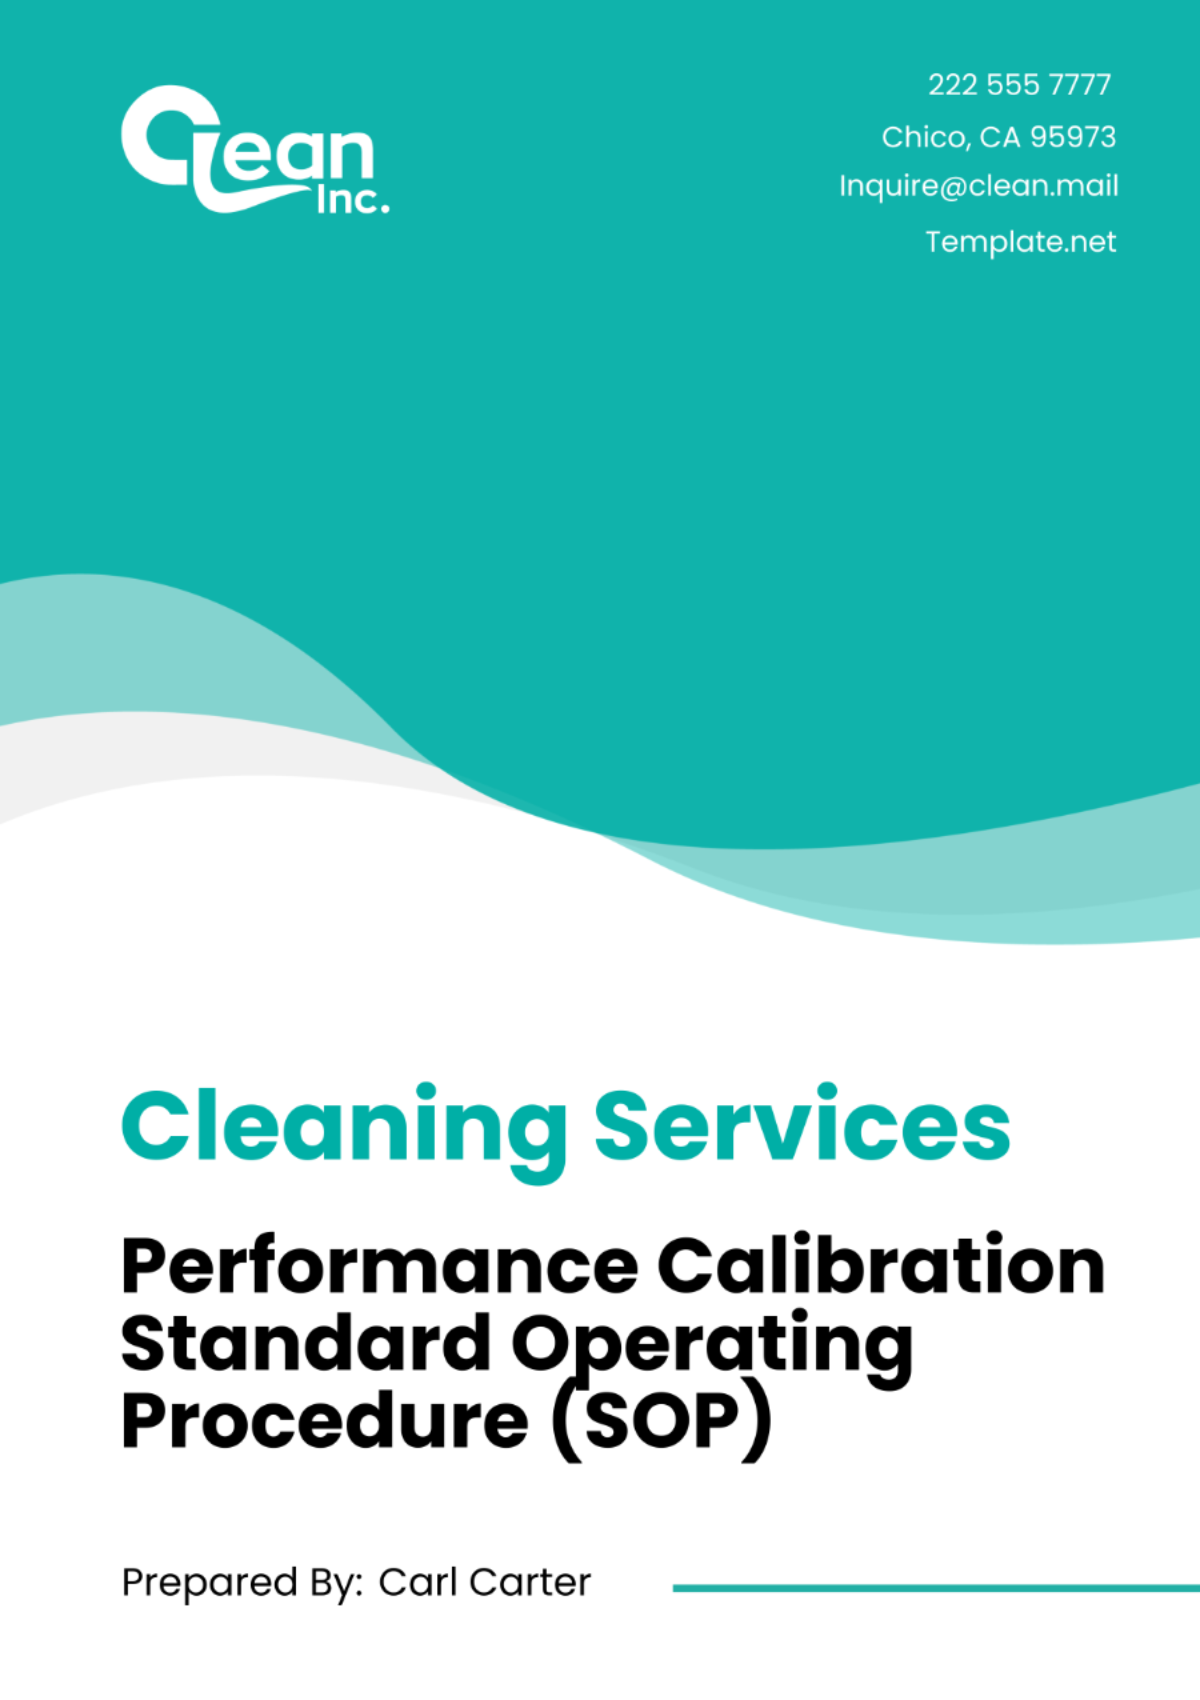 Cleaning Services Performance Calibration Standard Operating Procedure (SOP) Template